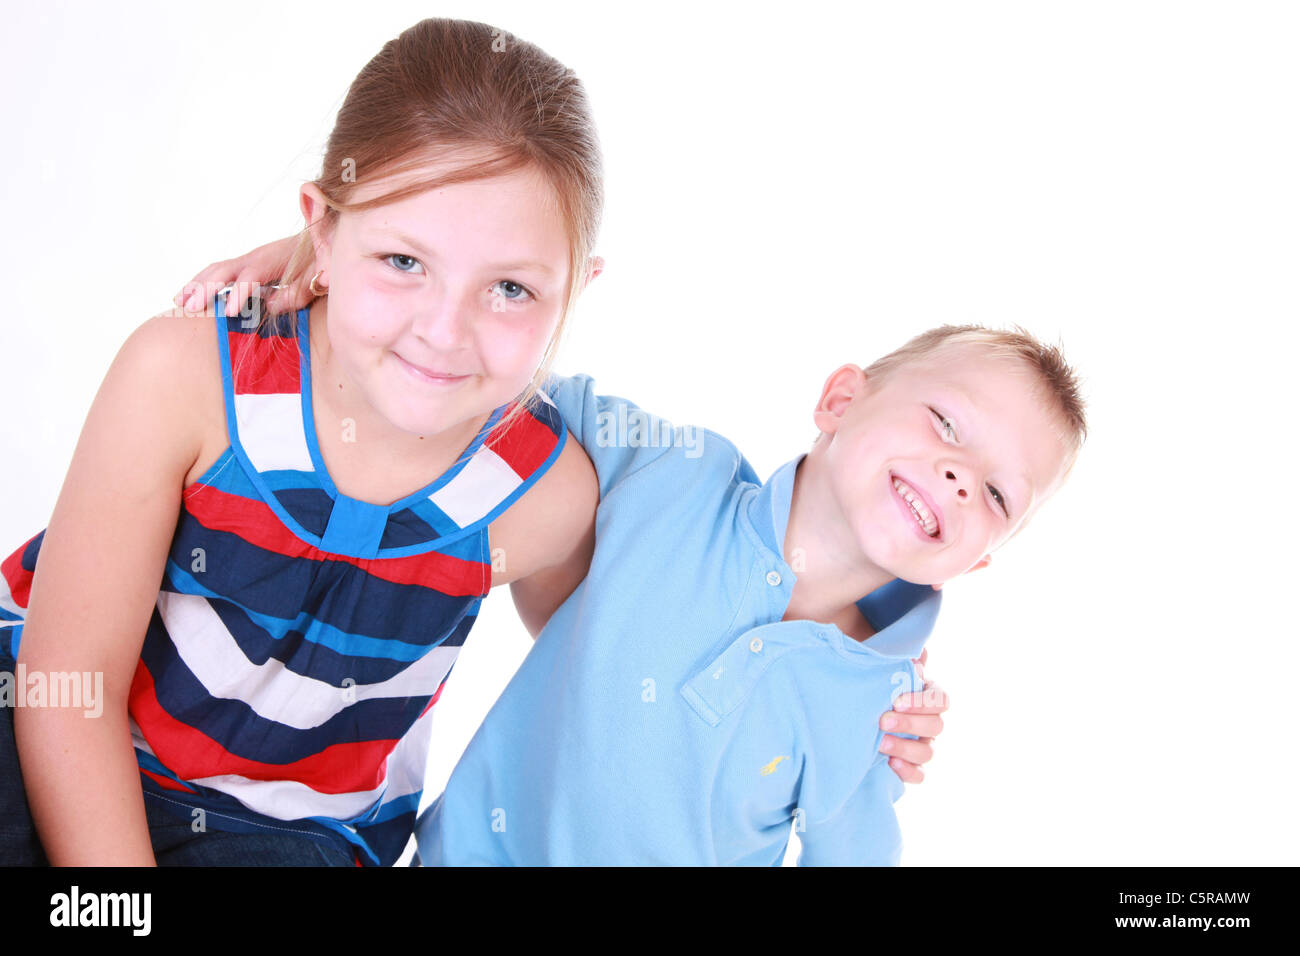 Studio Shot of a brother and sister Stock Photo